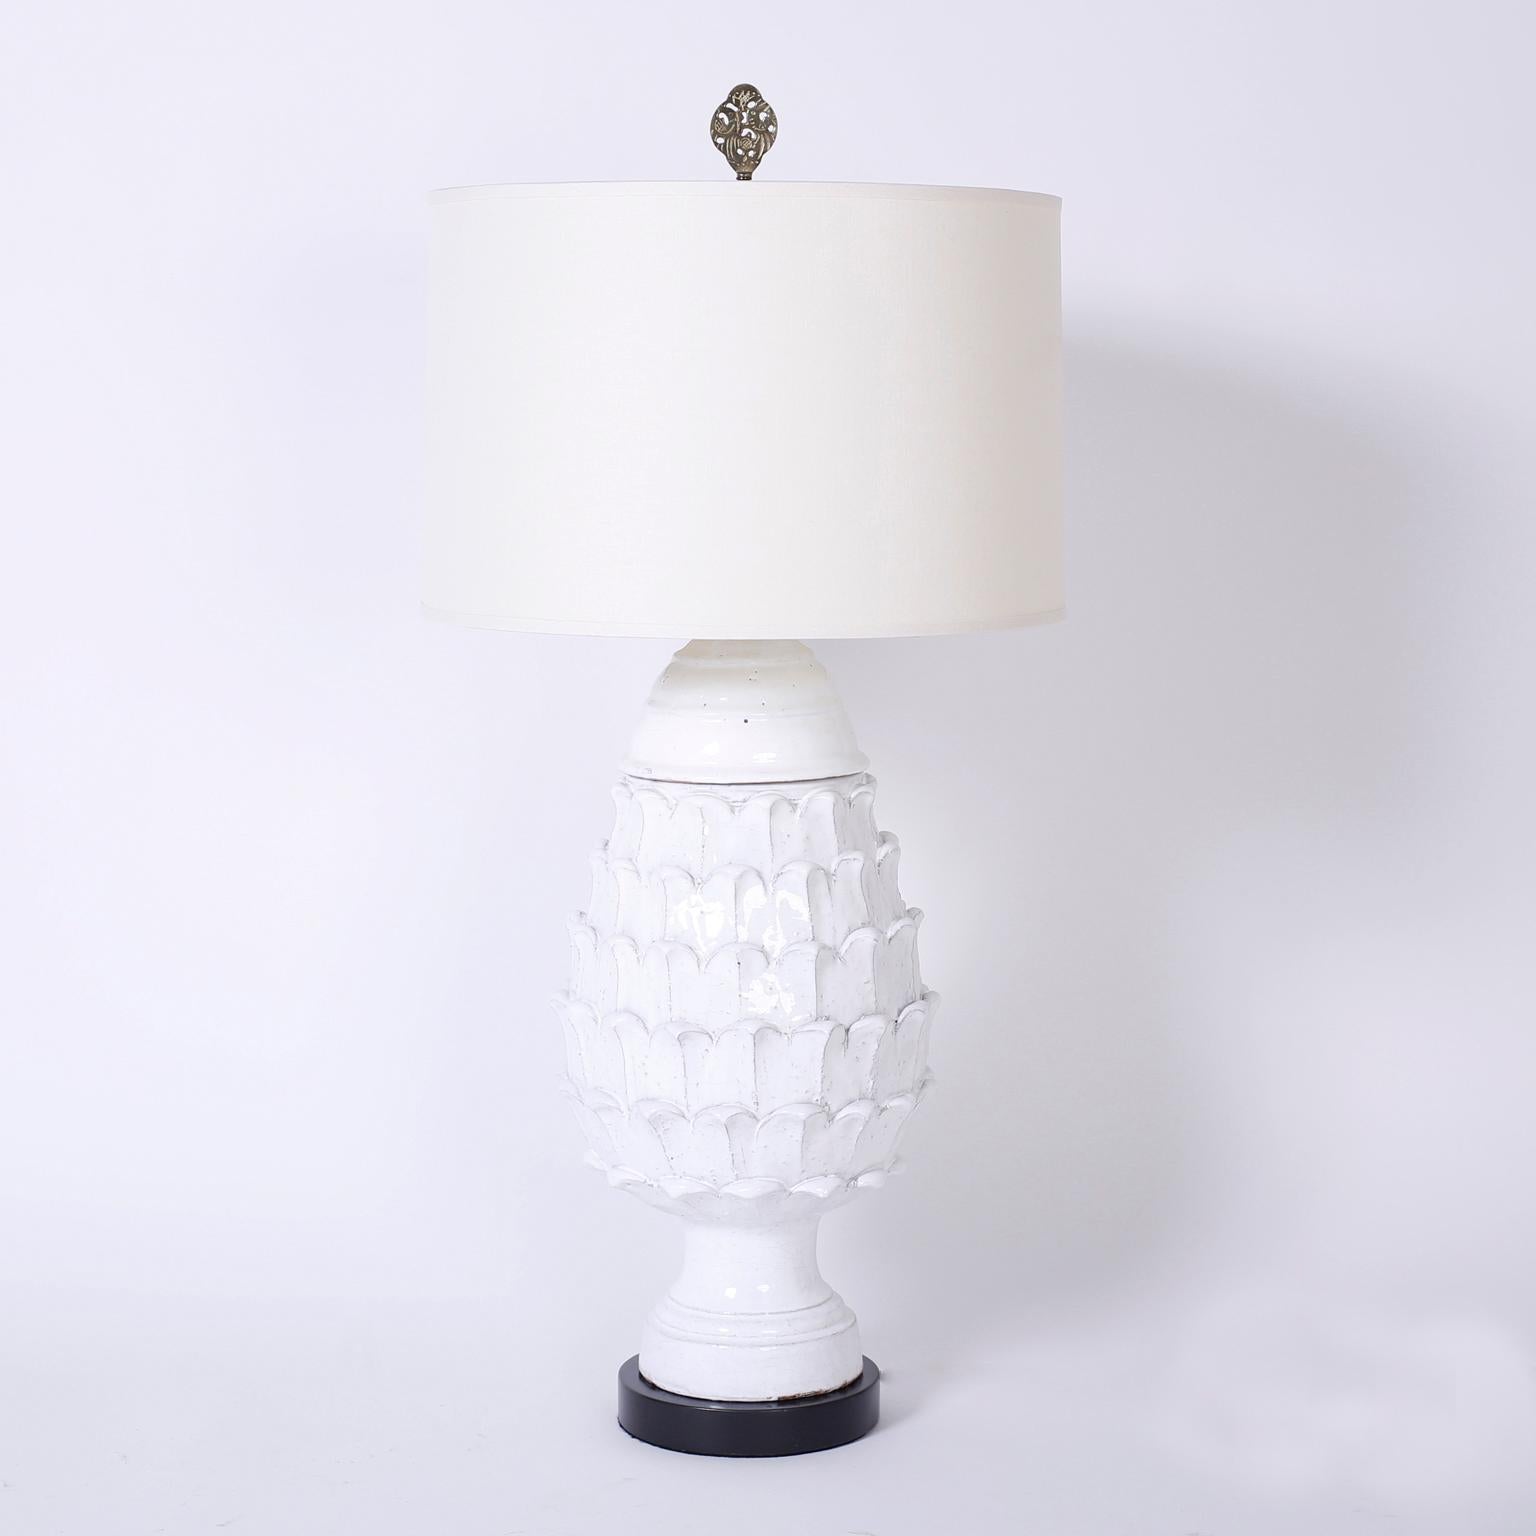 Swank pair of mid century artichoke terracotta table lamps with a translucent white glaze and a bold presence.